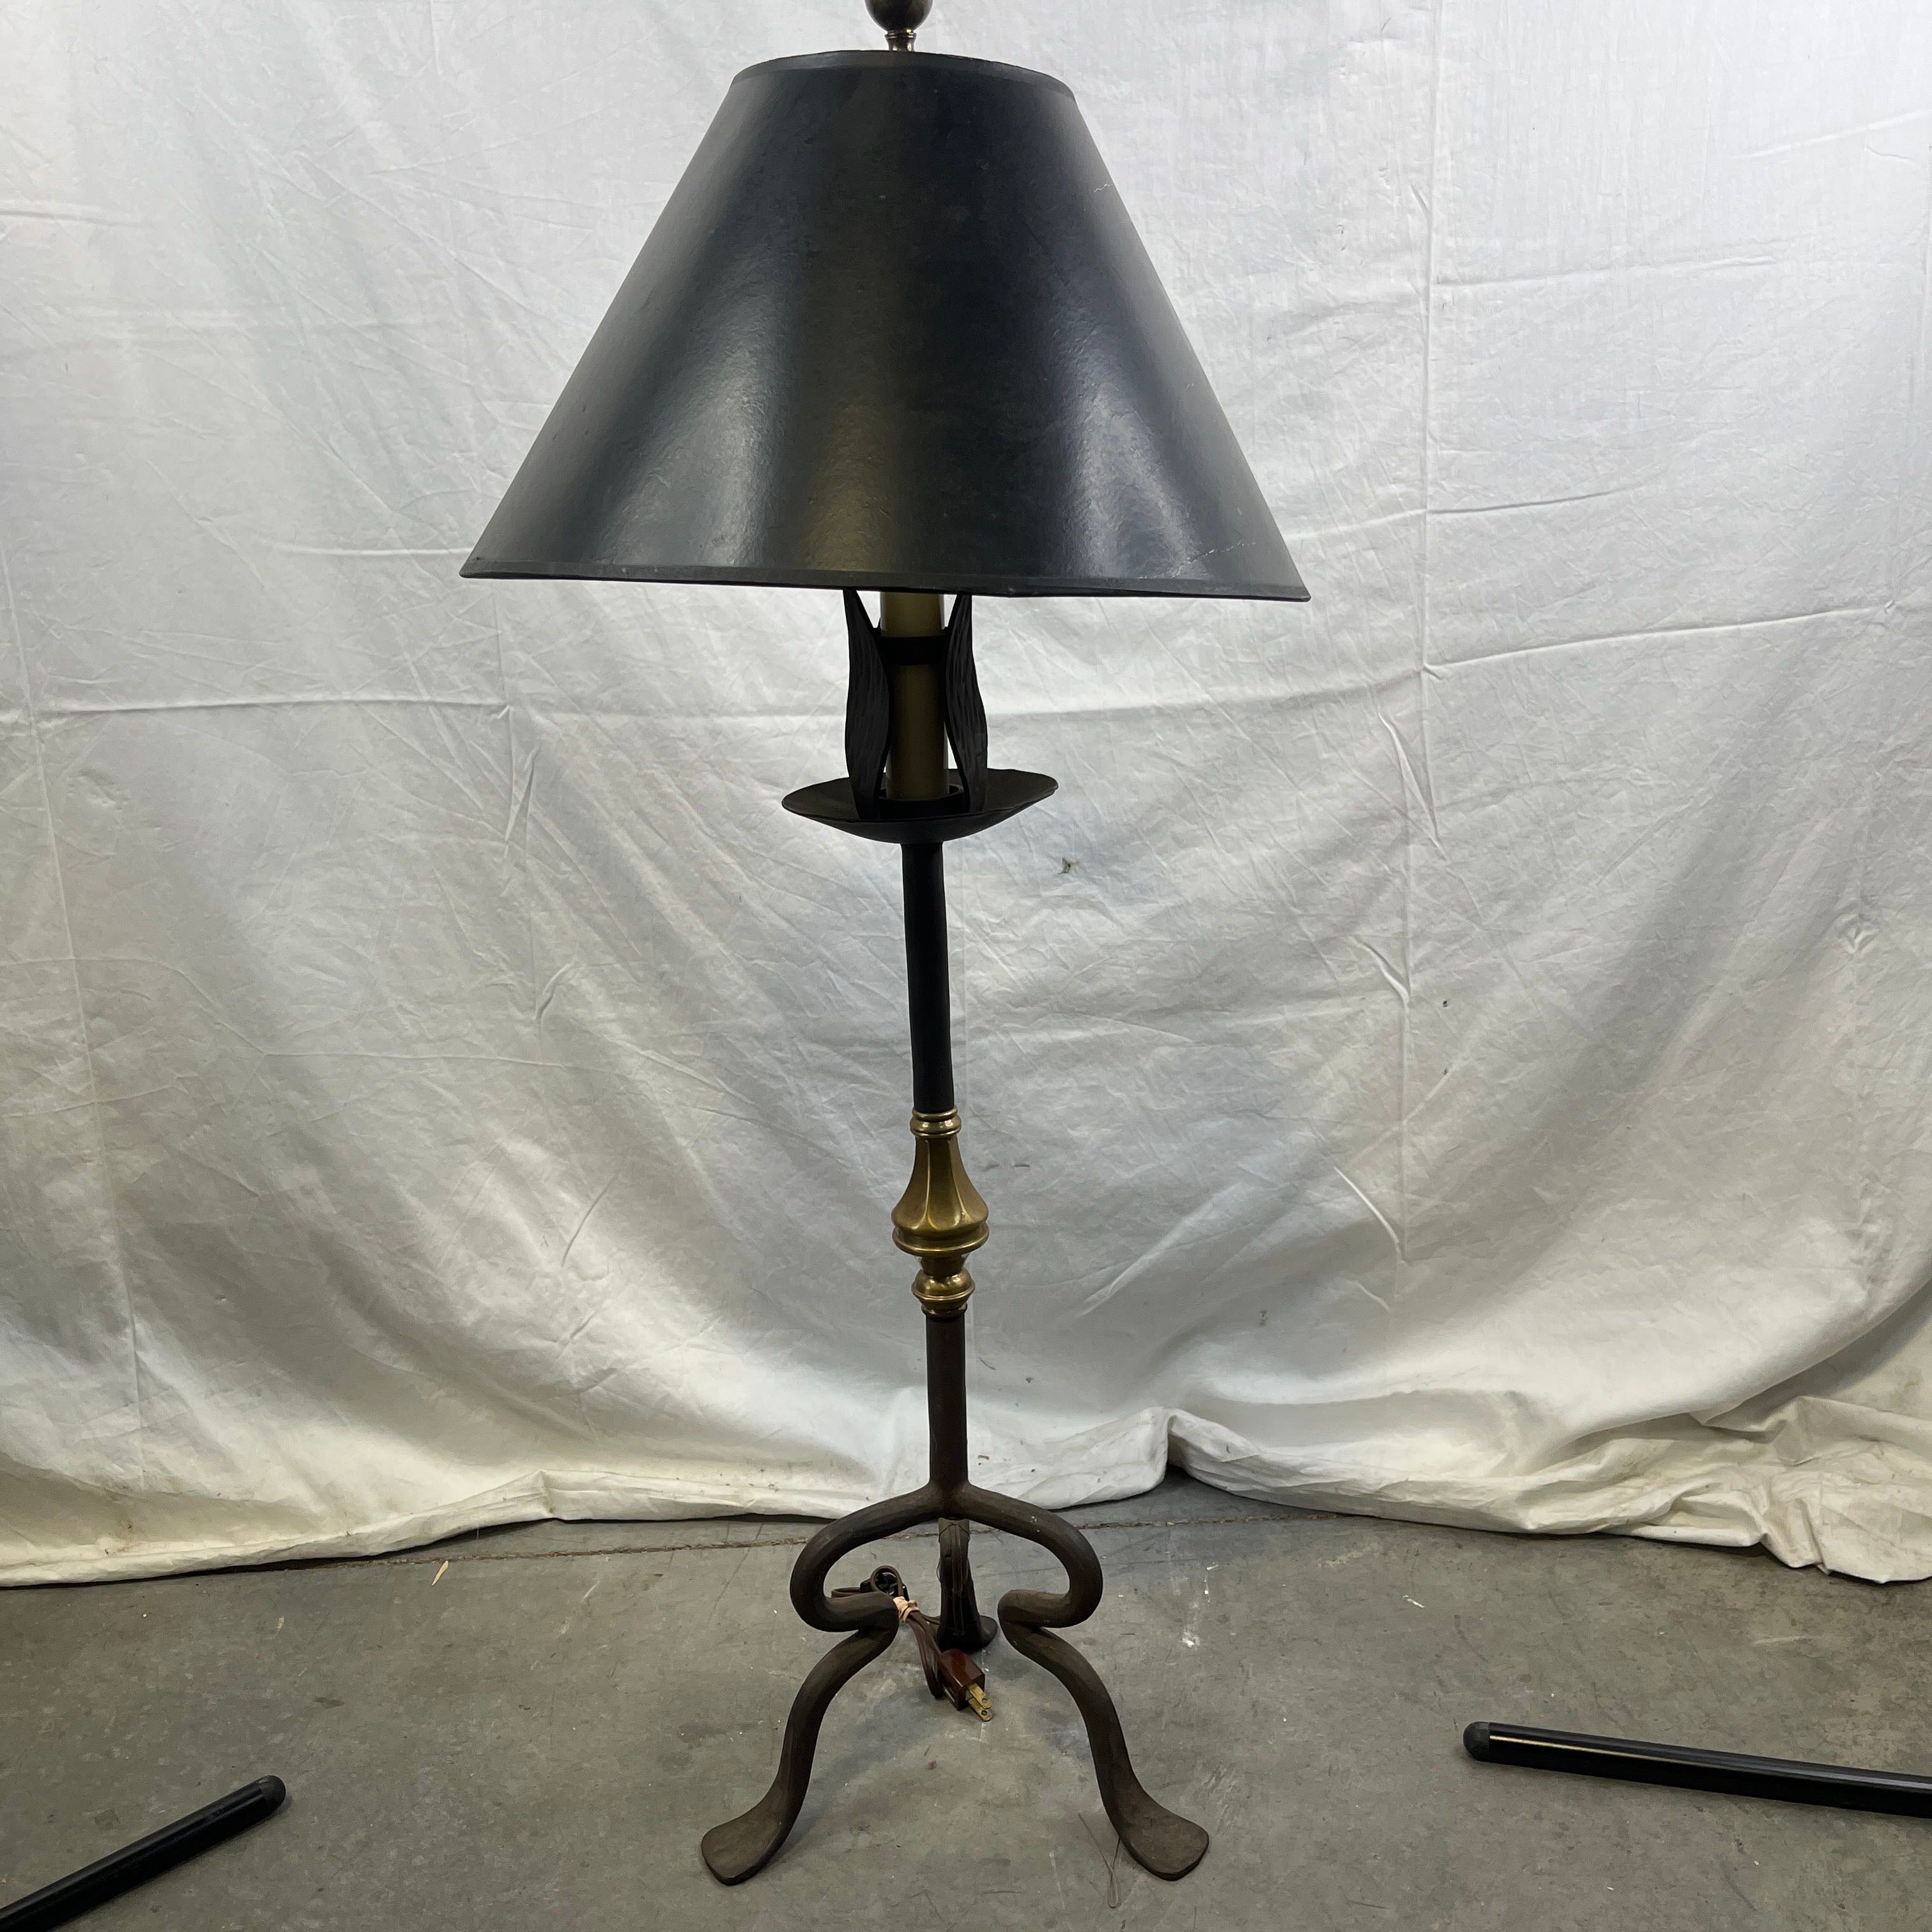 French 2-Light Wrought Iron 3 Legged with Hammered Flat Feet and Iron Leaf Candlestick Detailing Table Lamp